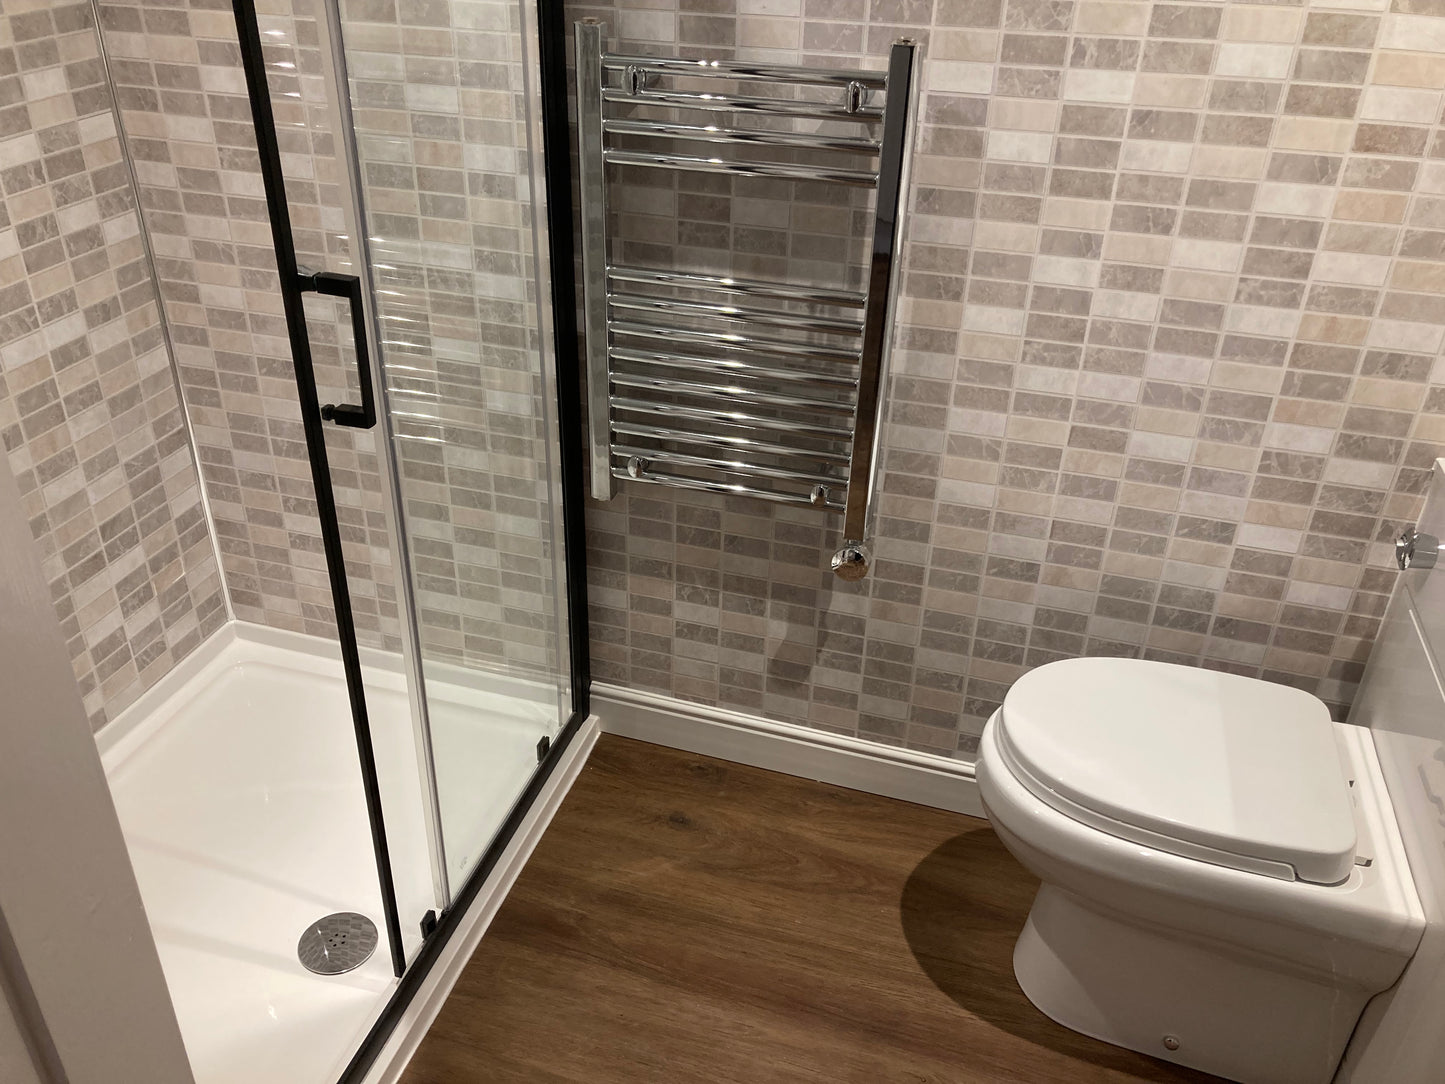 A fully fitted shower room and toilet with mosaic wall lining panels in a granny annexe